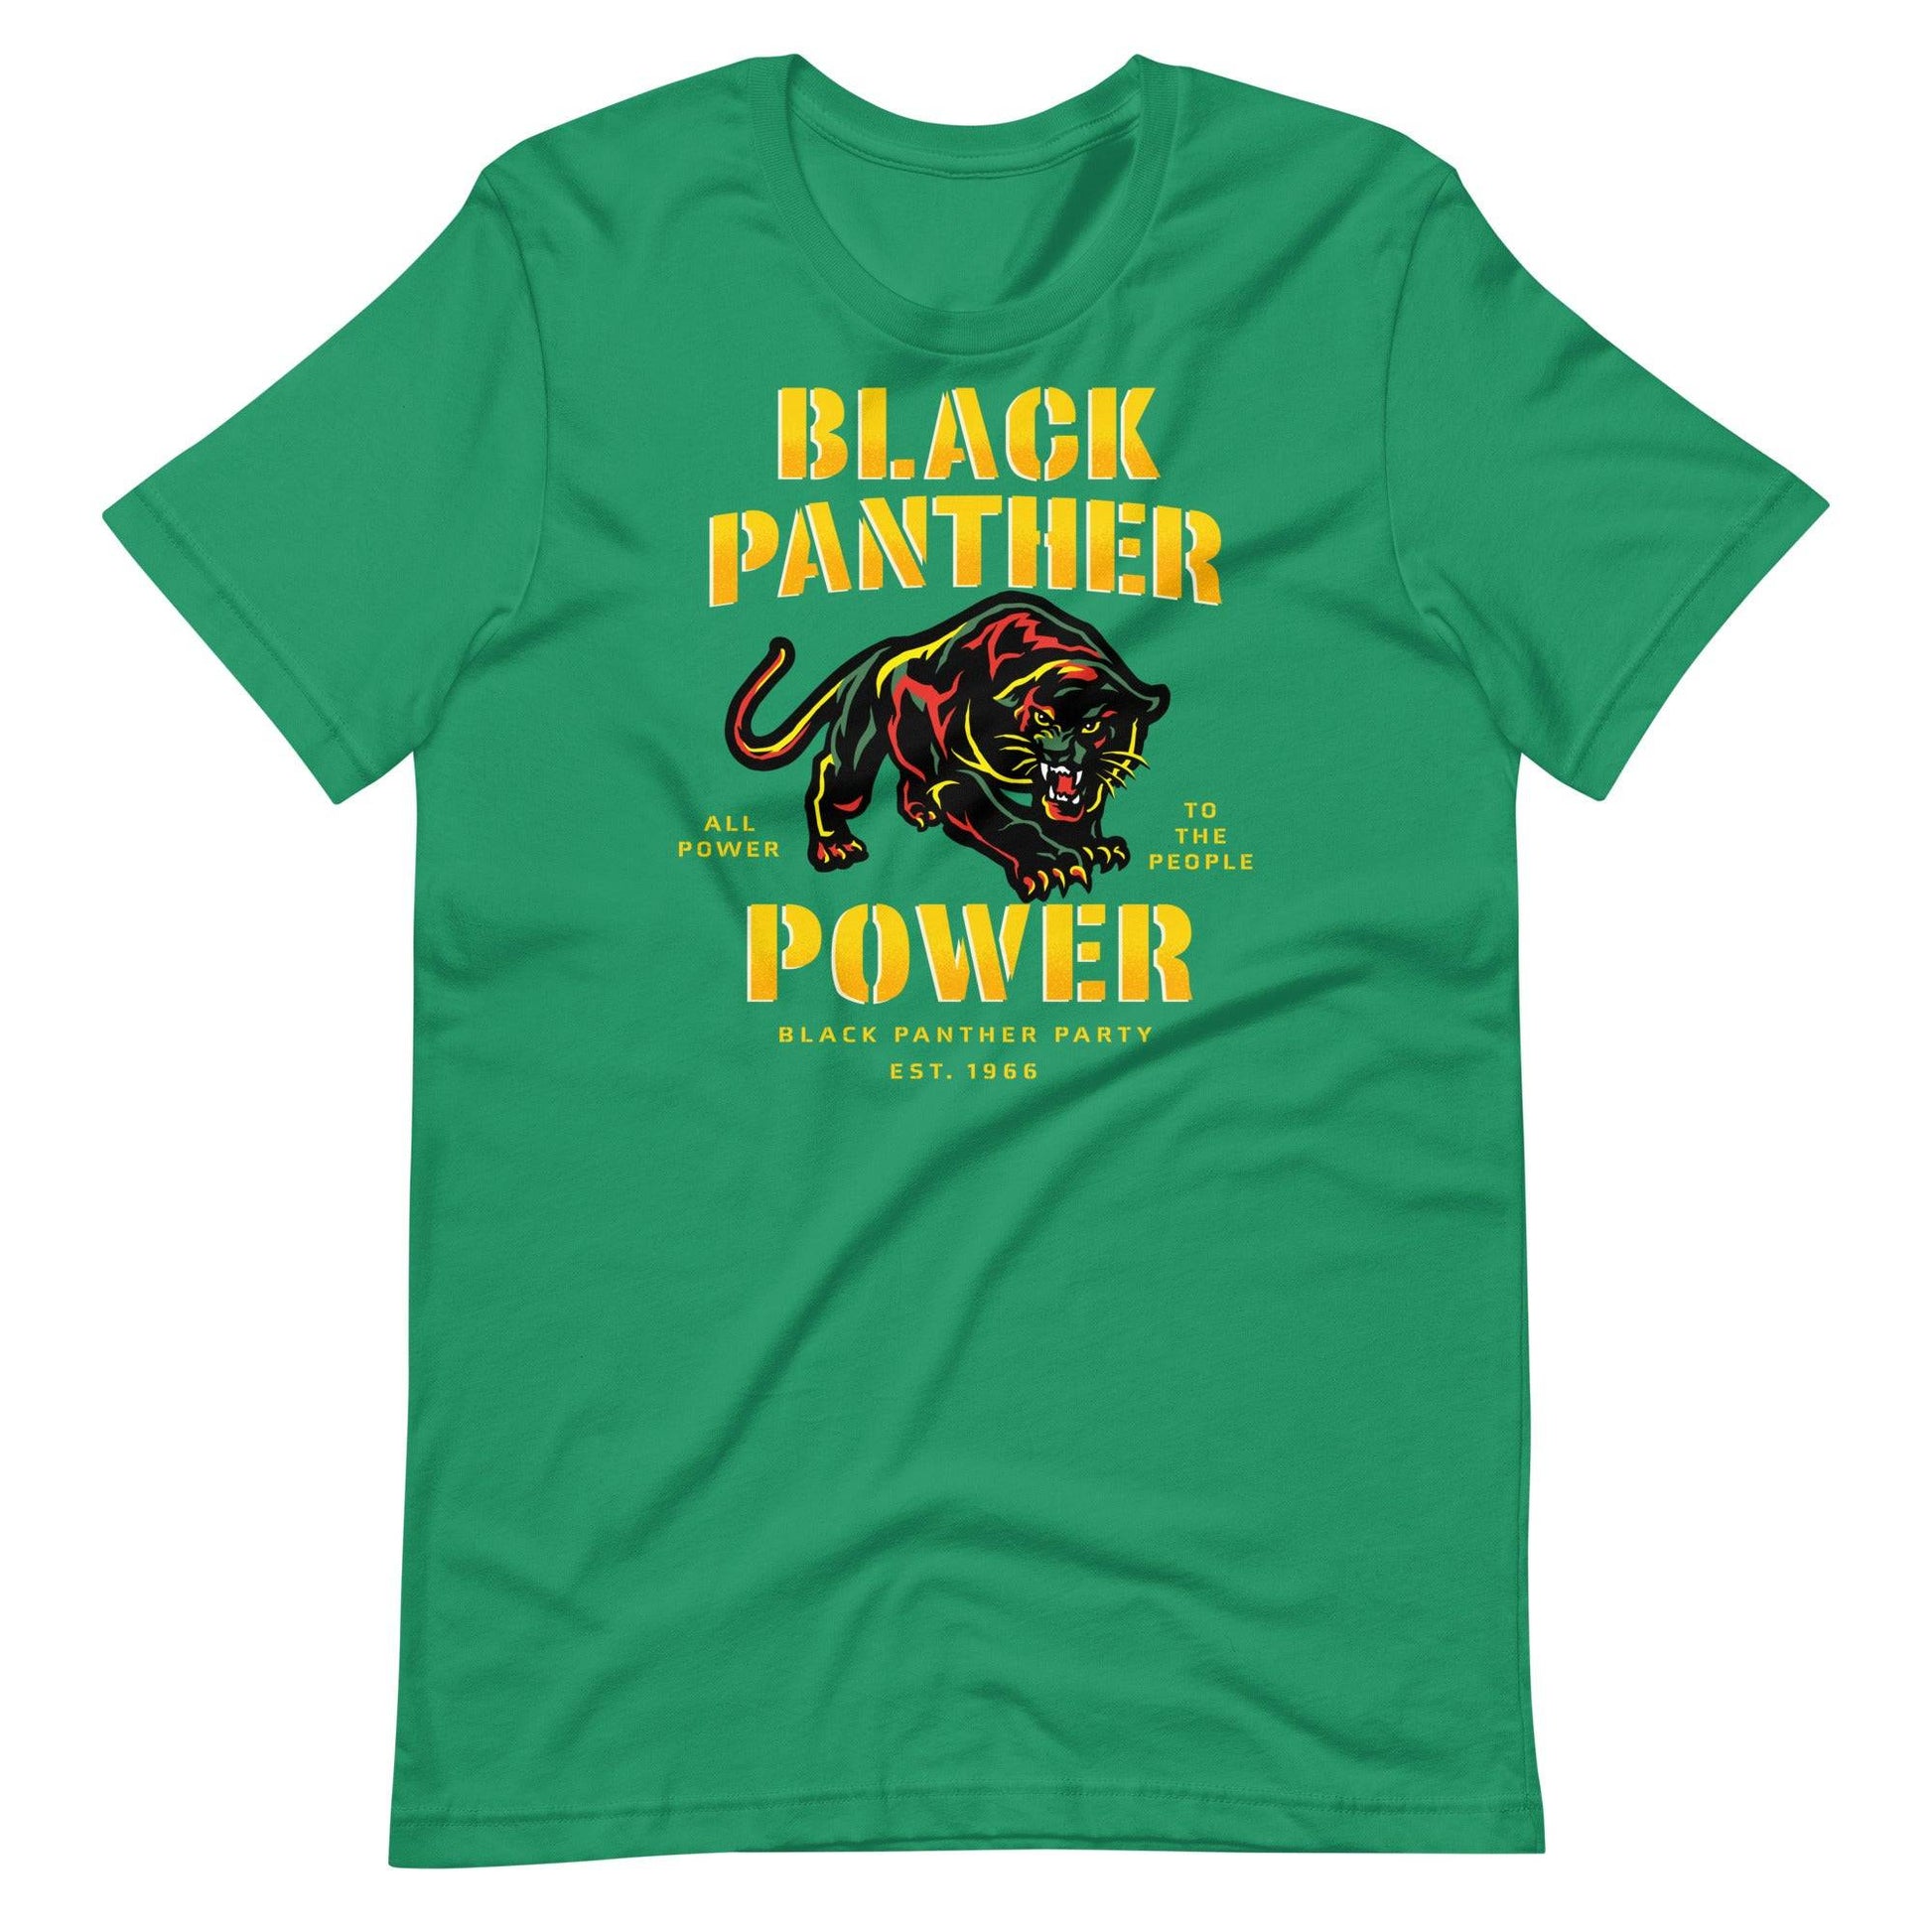 a green t - shirt with a black panther on it